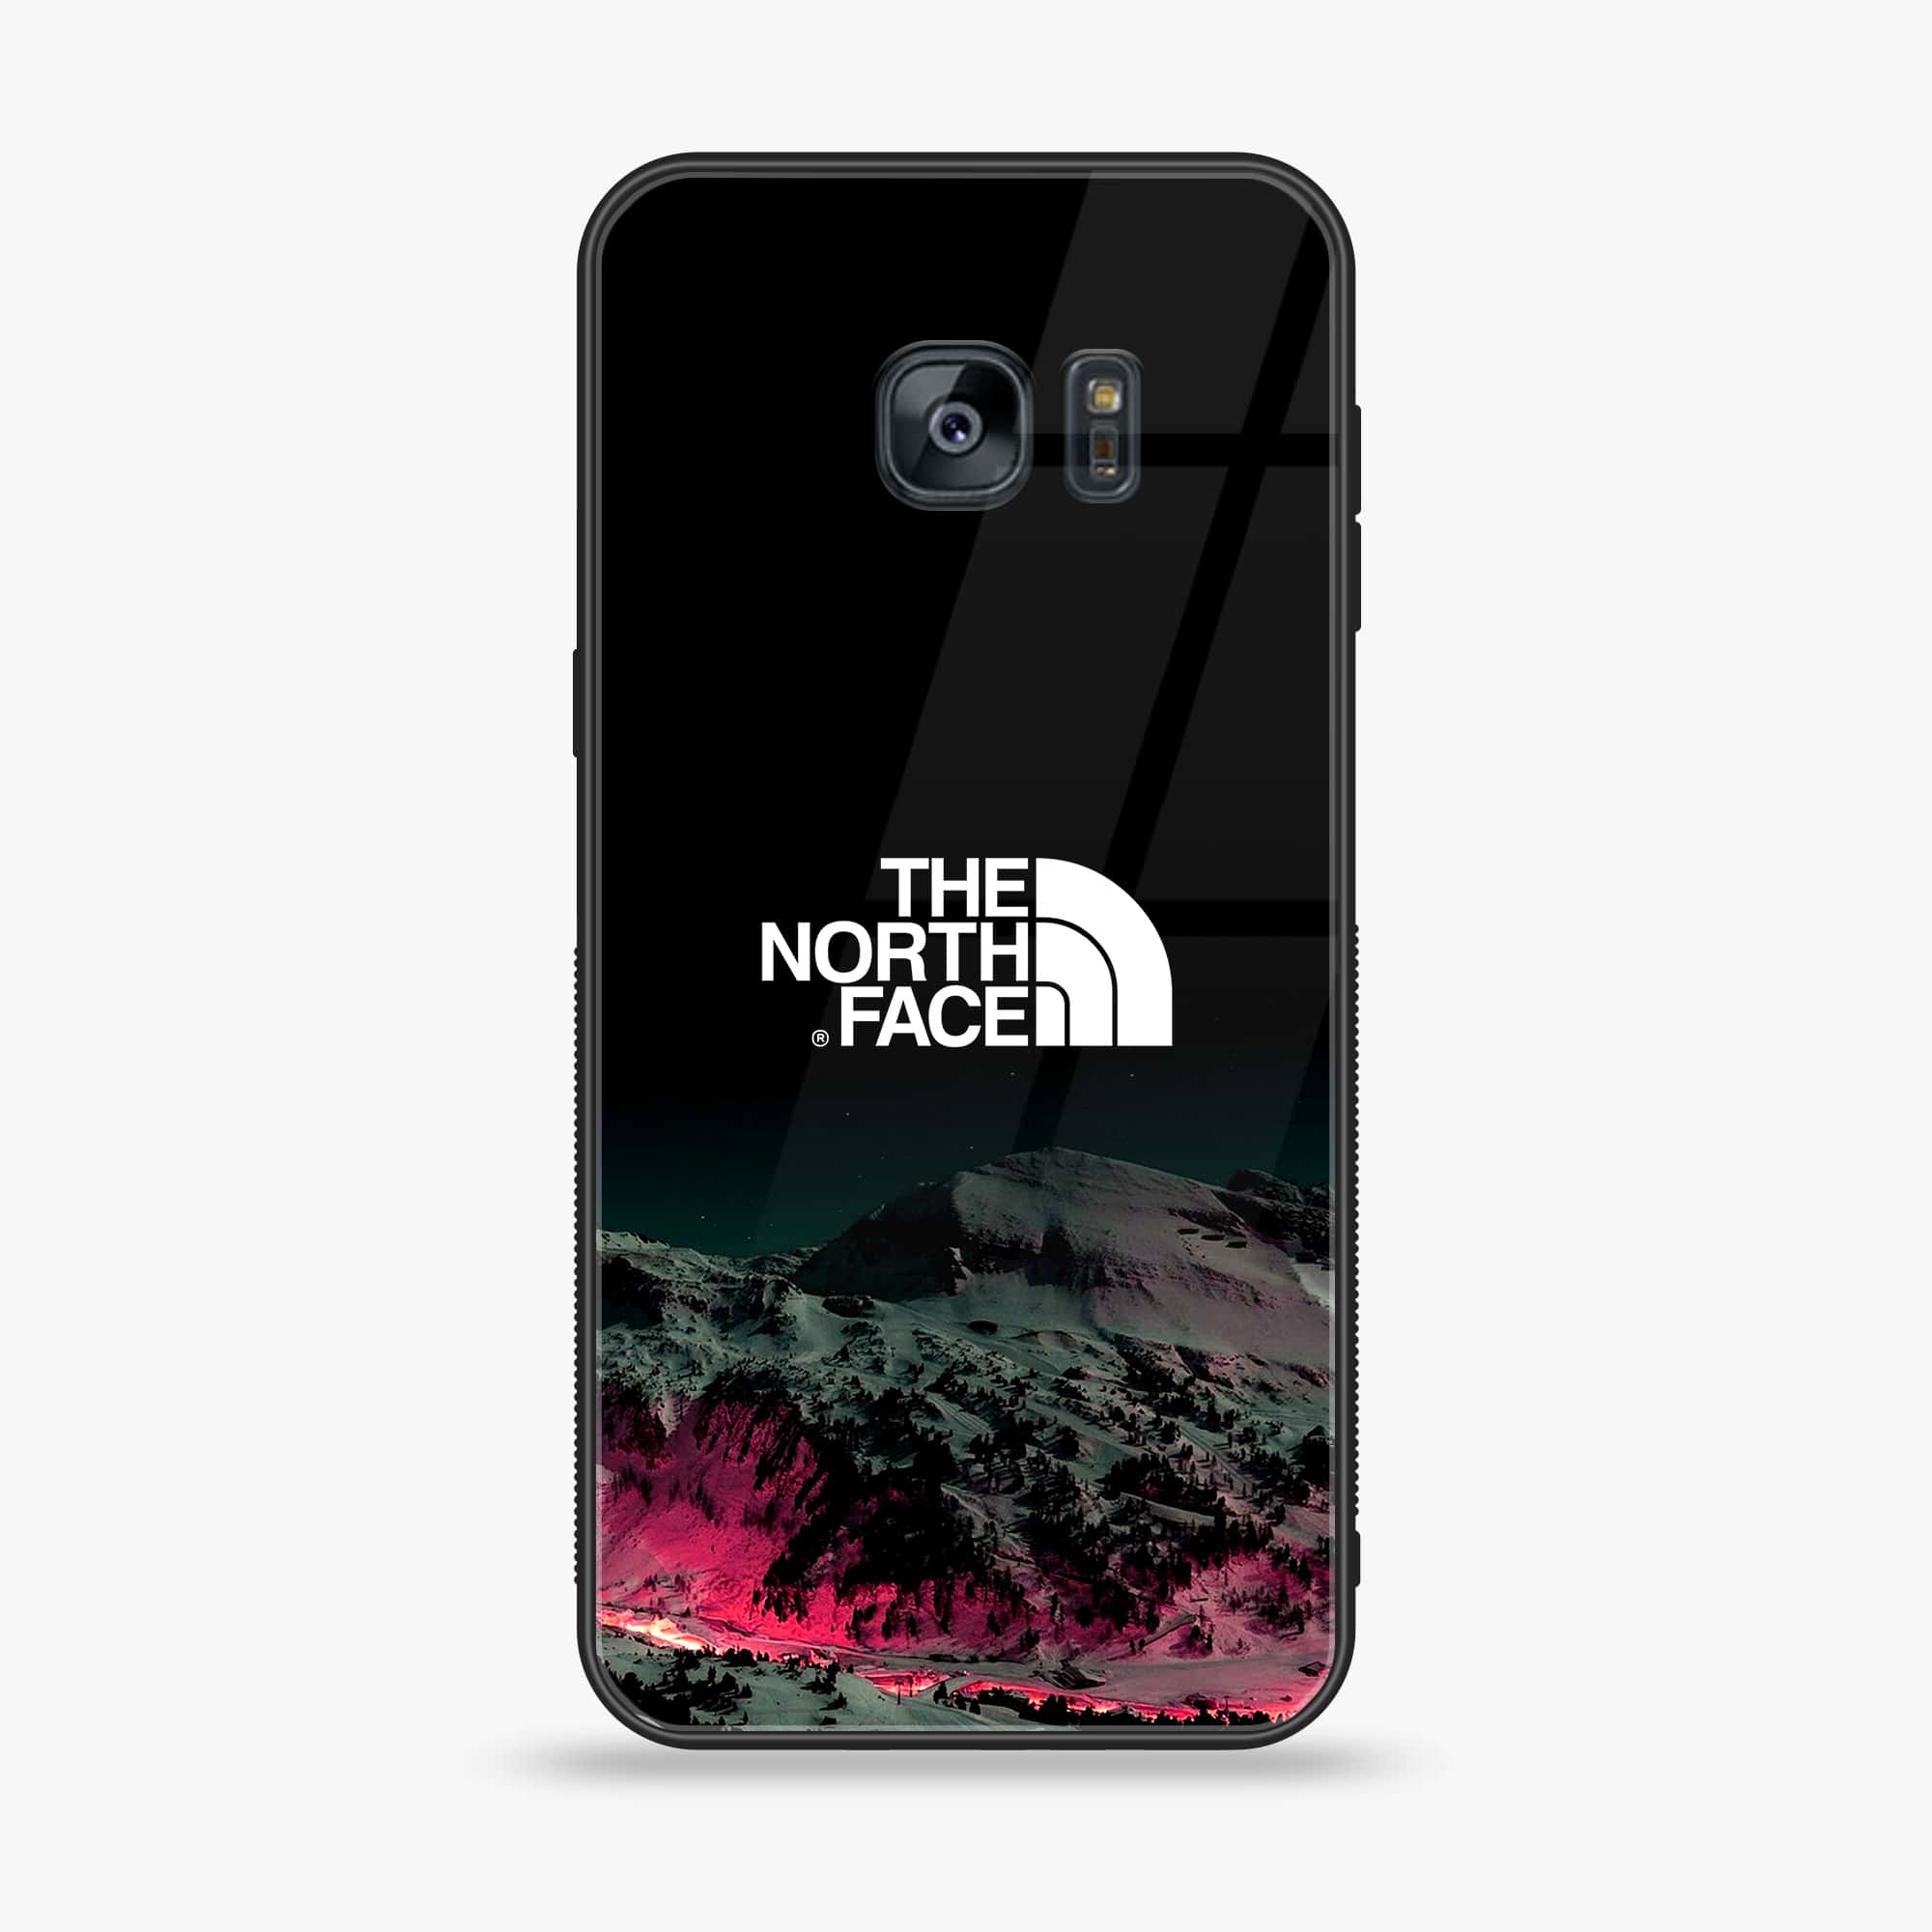 Samsung Galaxy S7 - The North Face Series - Premium Printed Glass soft Bumper shock Proof Case